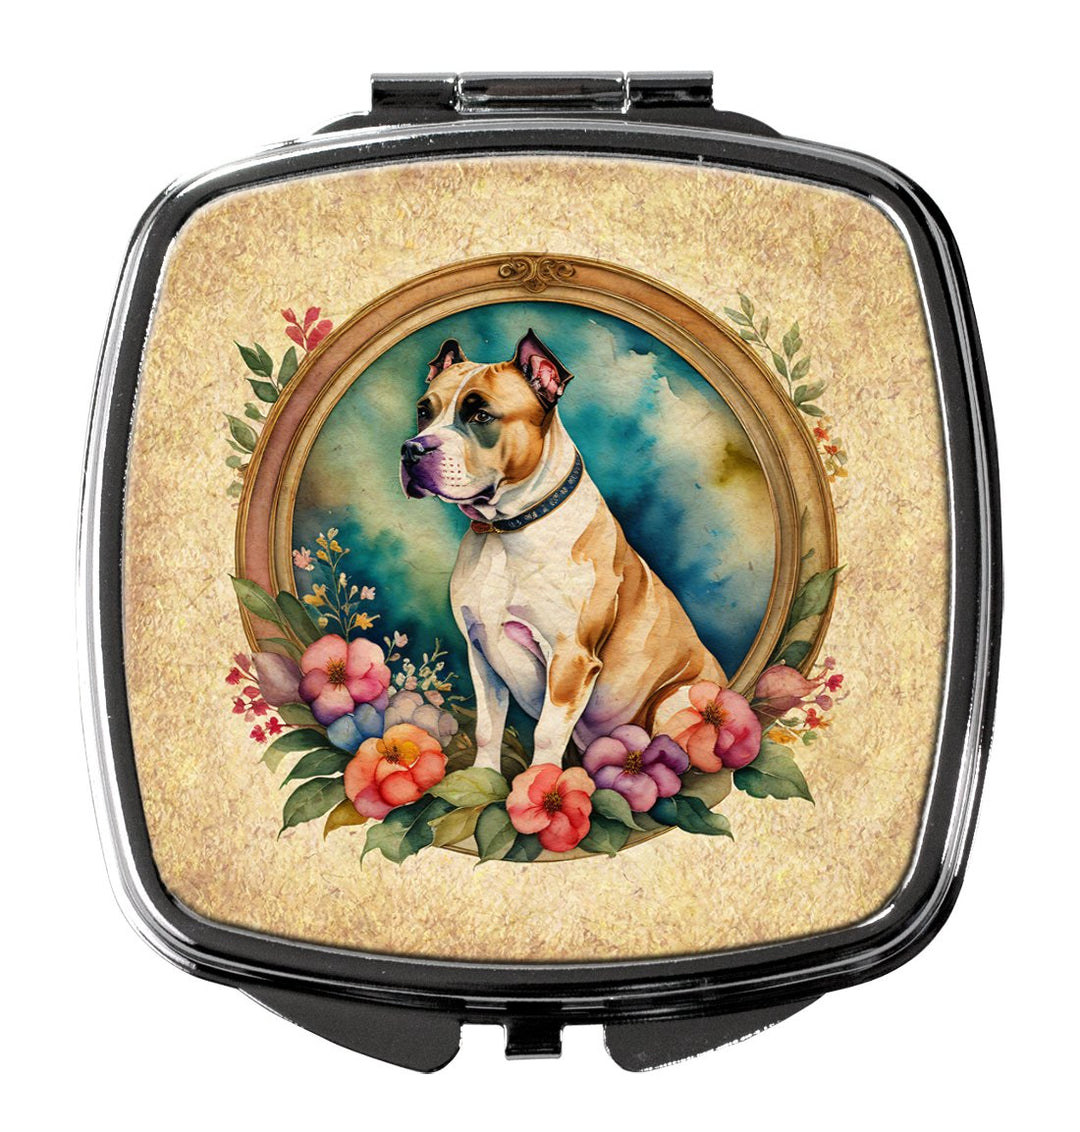 Yorkshire Terrier and Flowers Compact Mirror Image 9